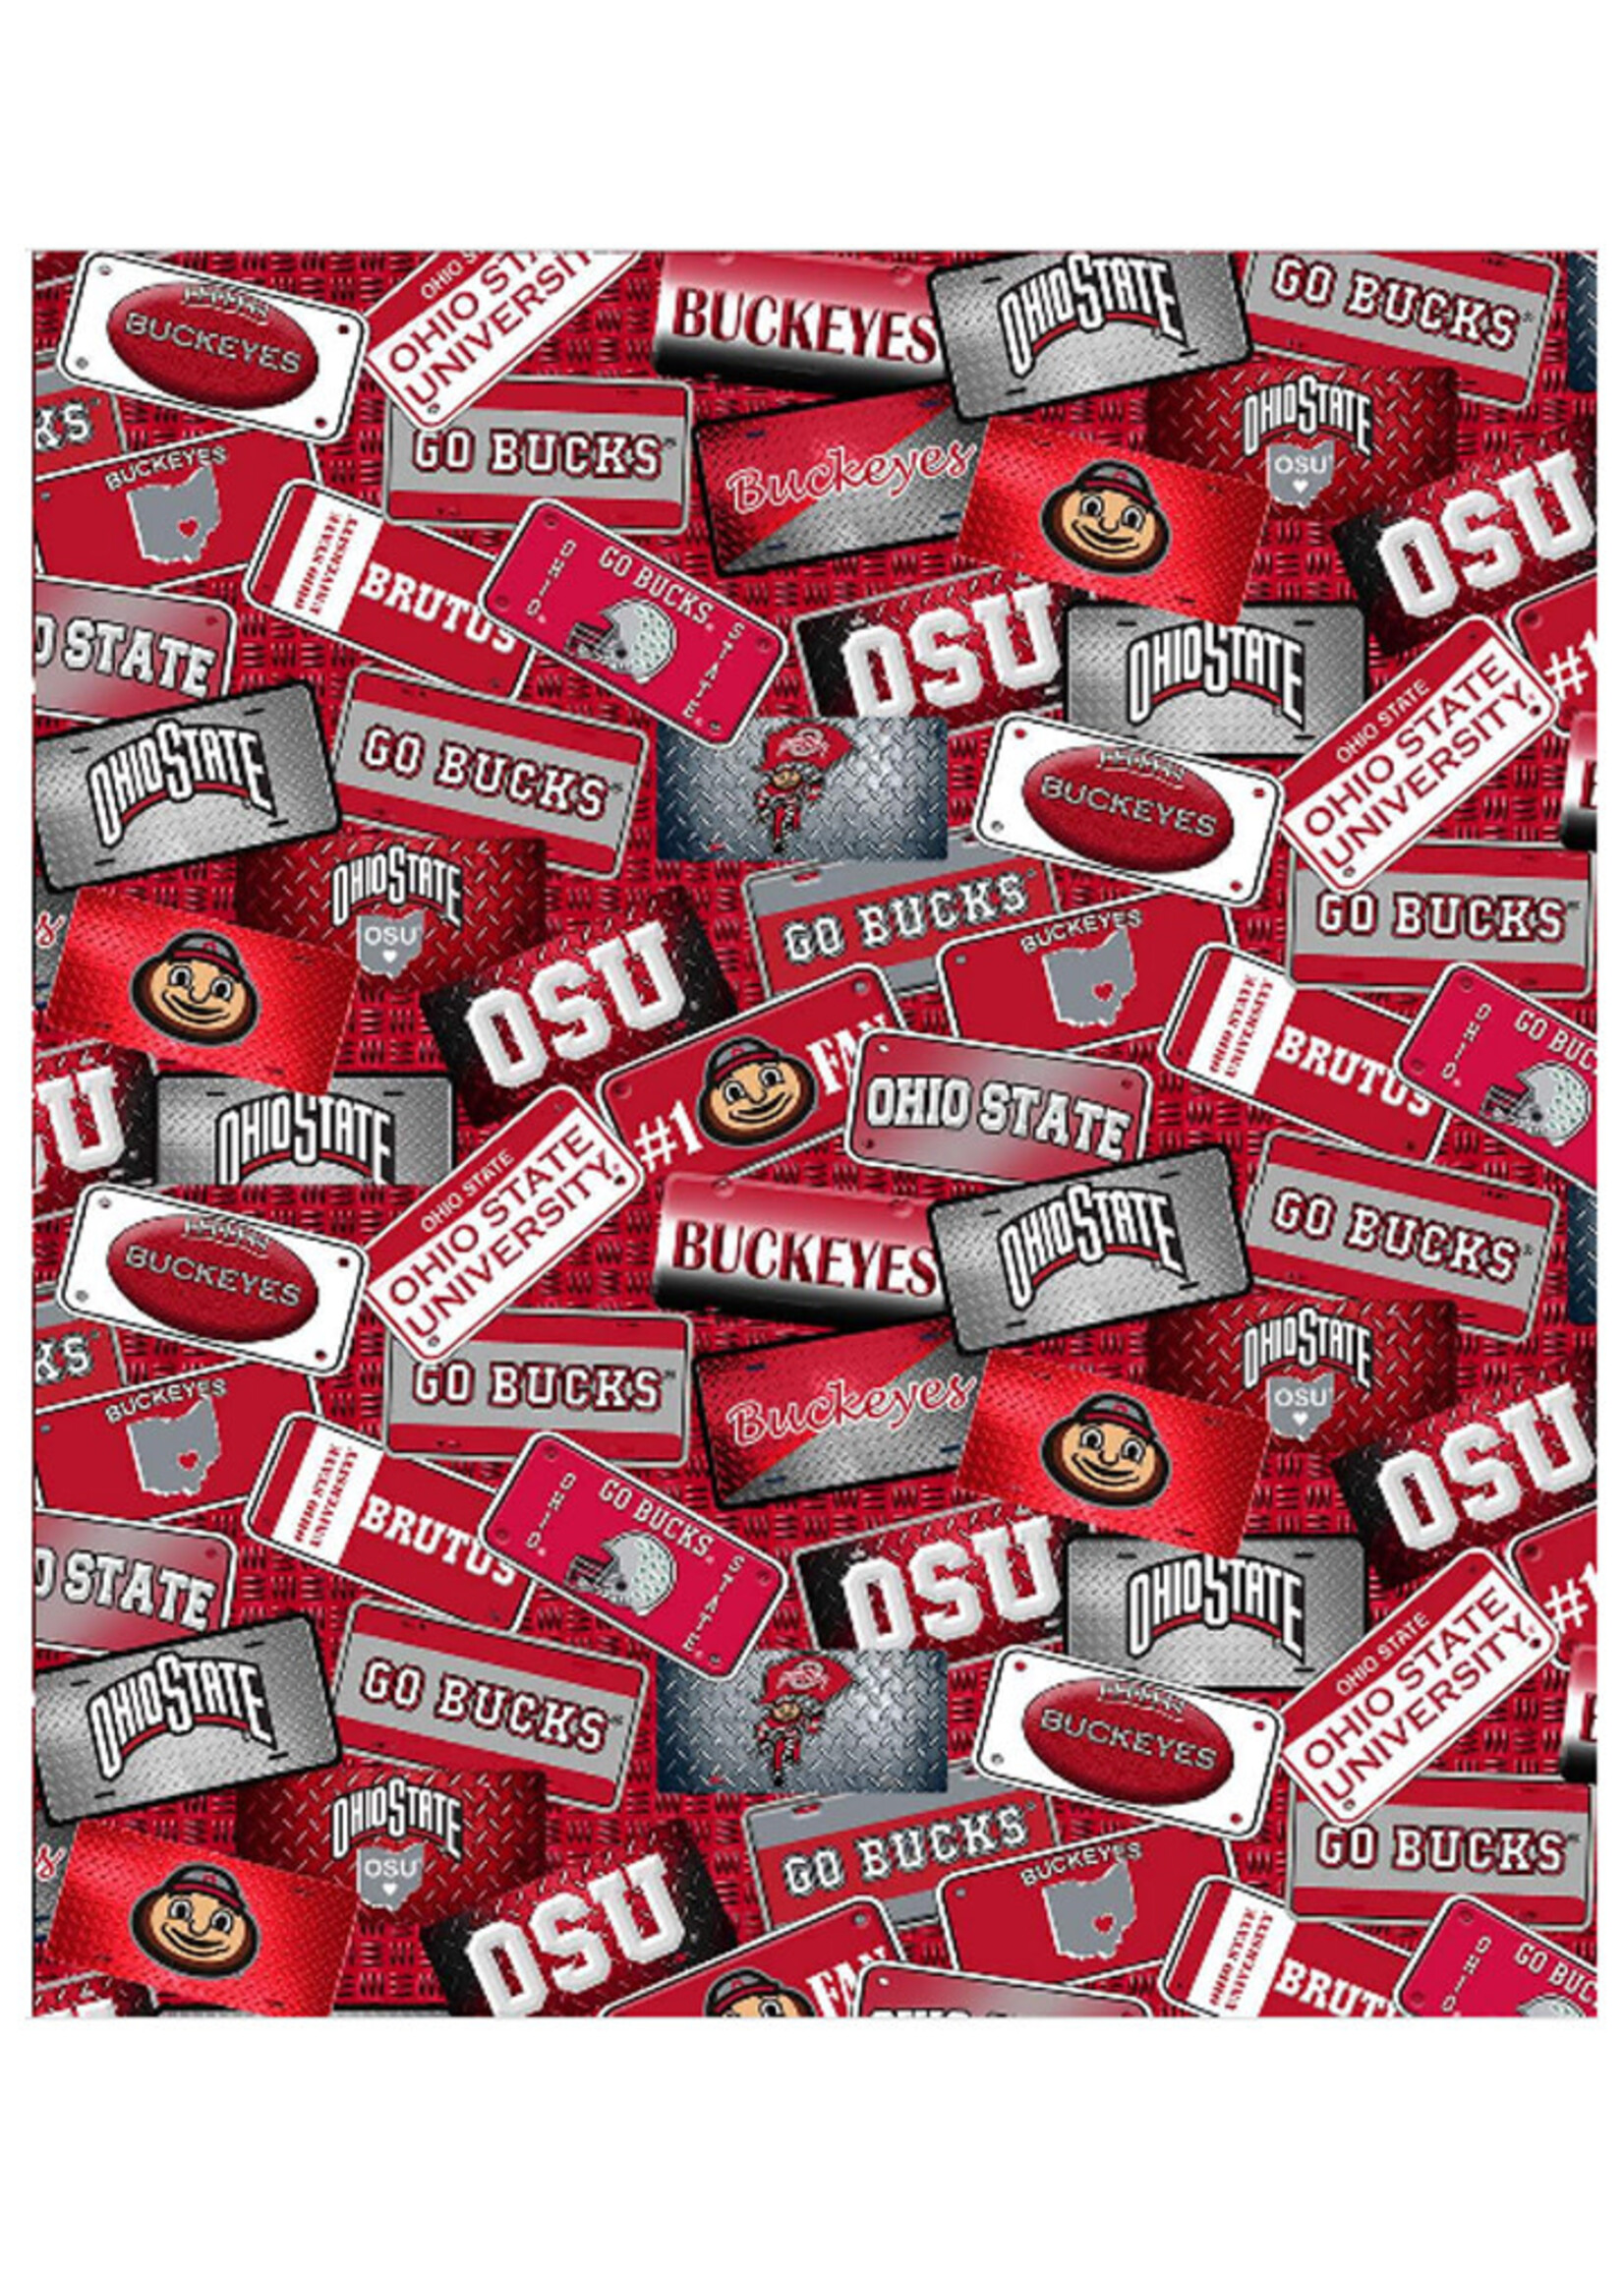 Ohio State Buckeyes License Plate Cotton Material 15ydsx42in